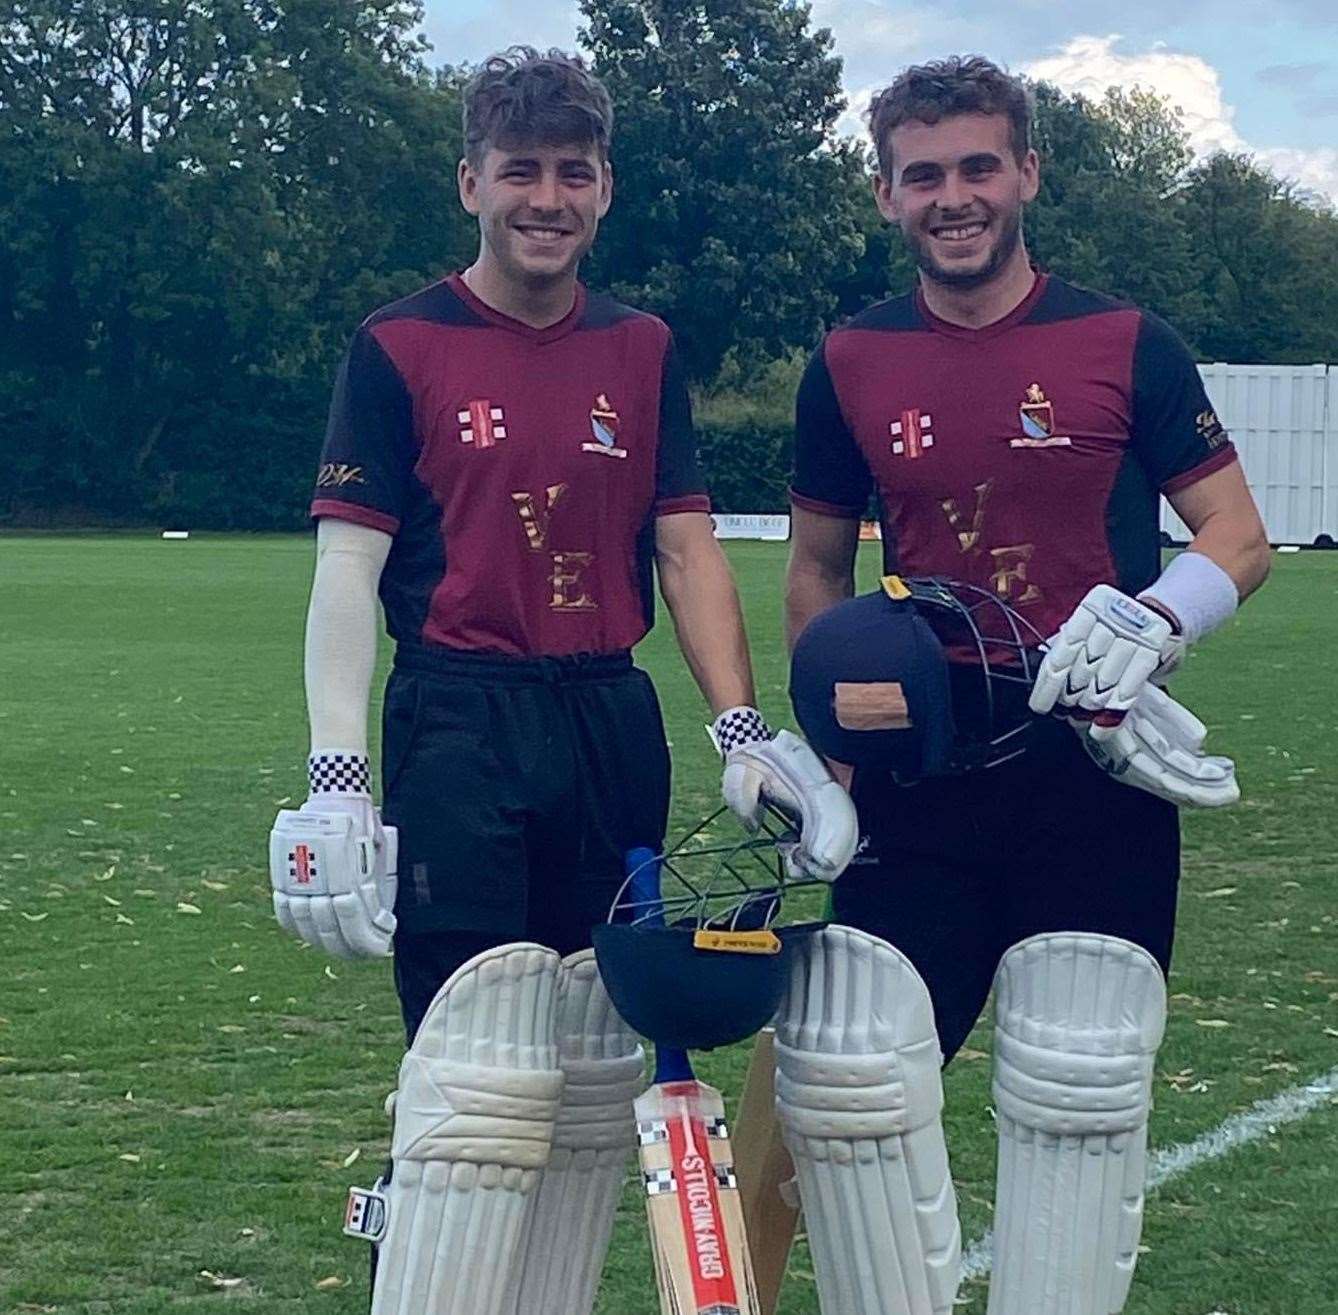 Jack and Ben Aldred are both keen cricketers